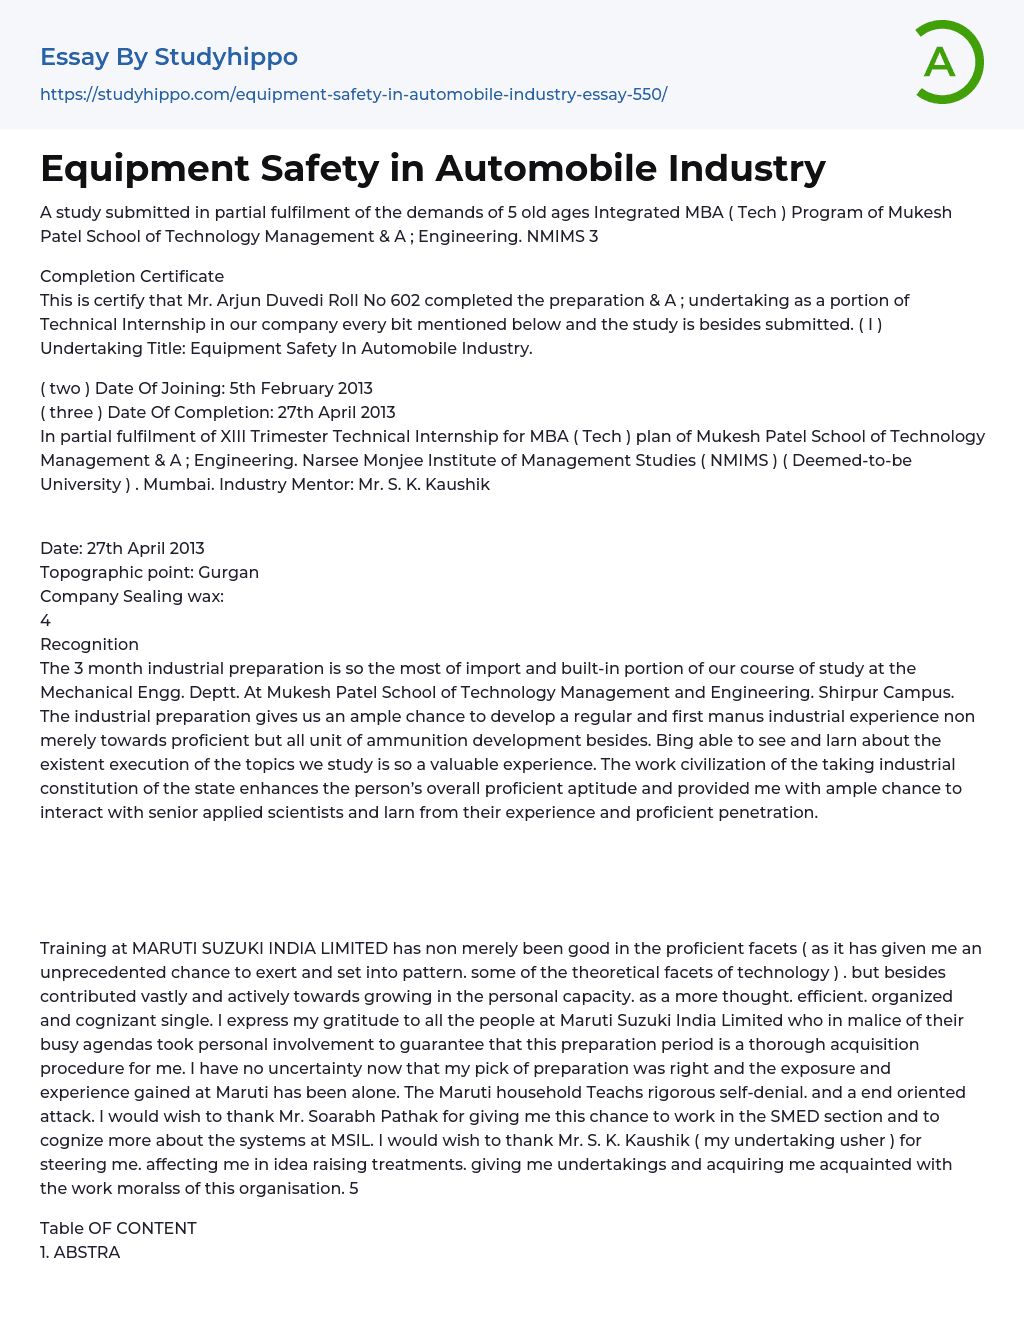 Equipment Safety in Automobile Industry Essay Example